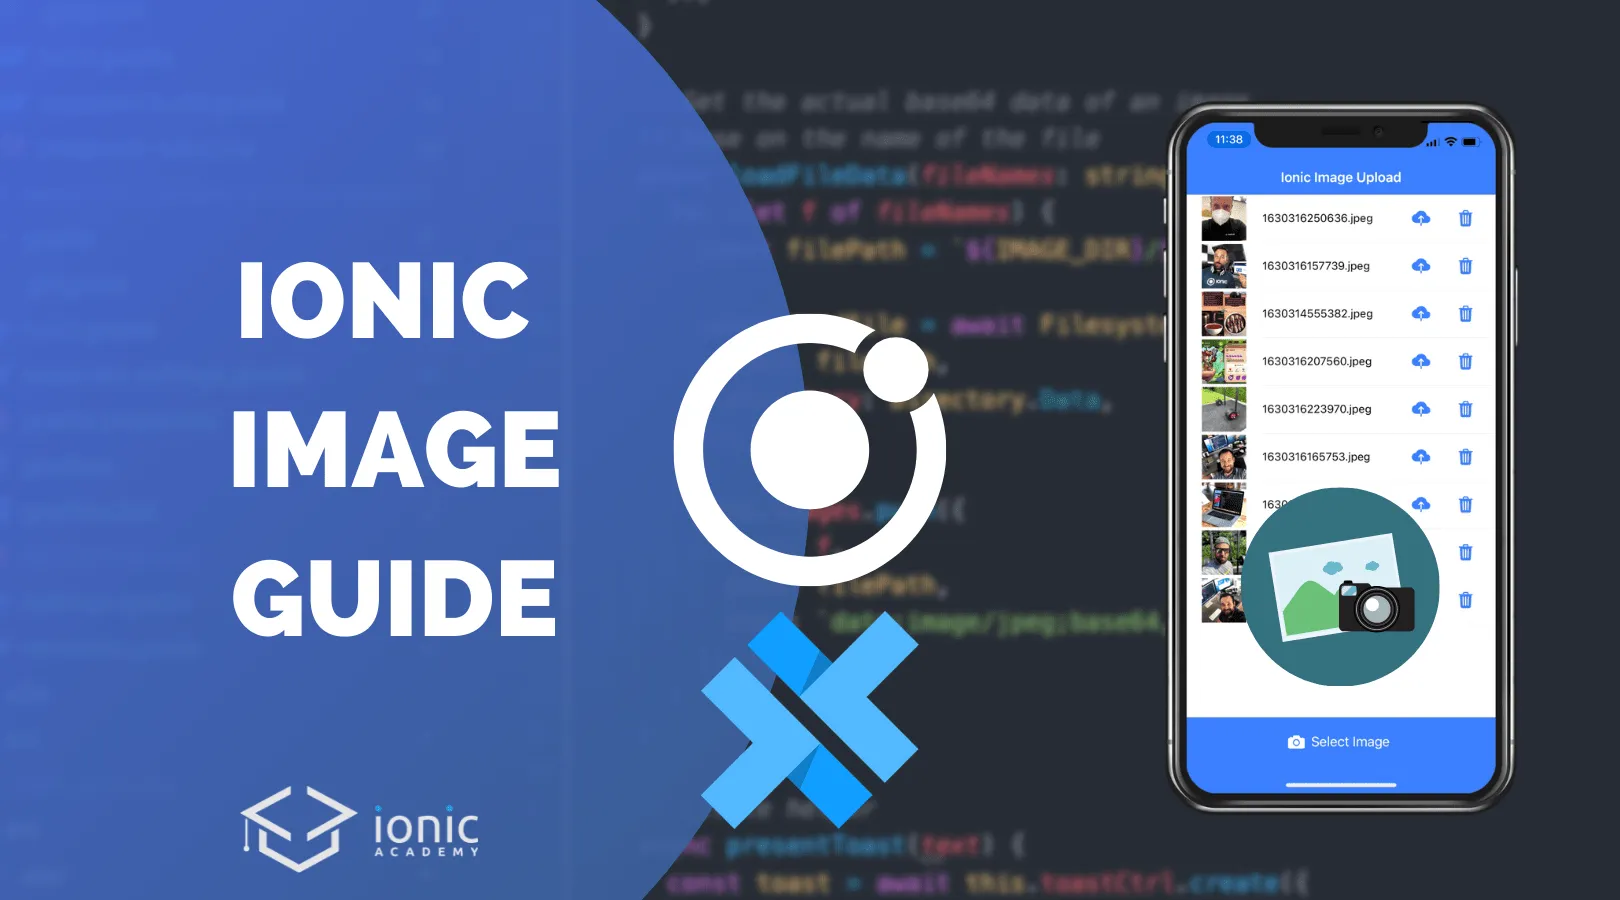 The Ionic Image Guide with Capacitor (Capture, Store & Upload)